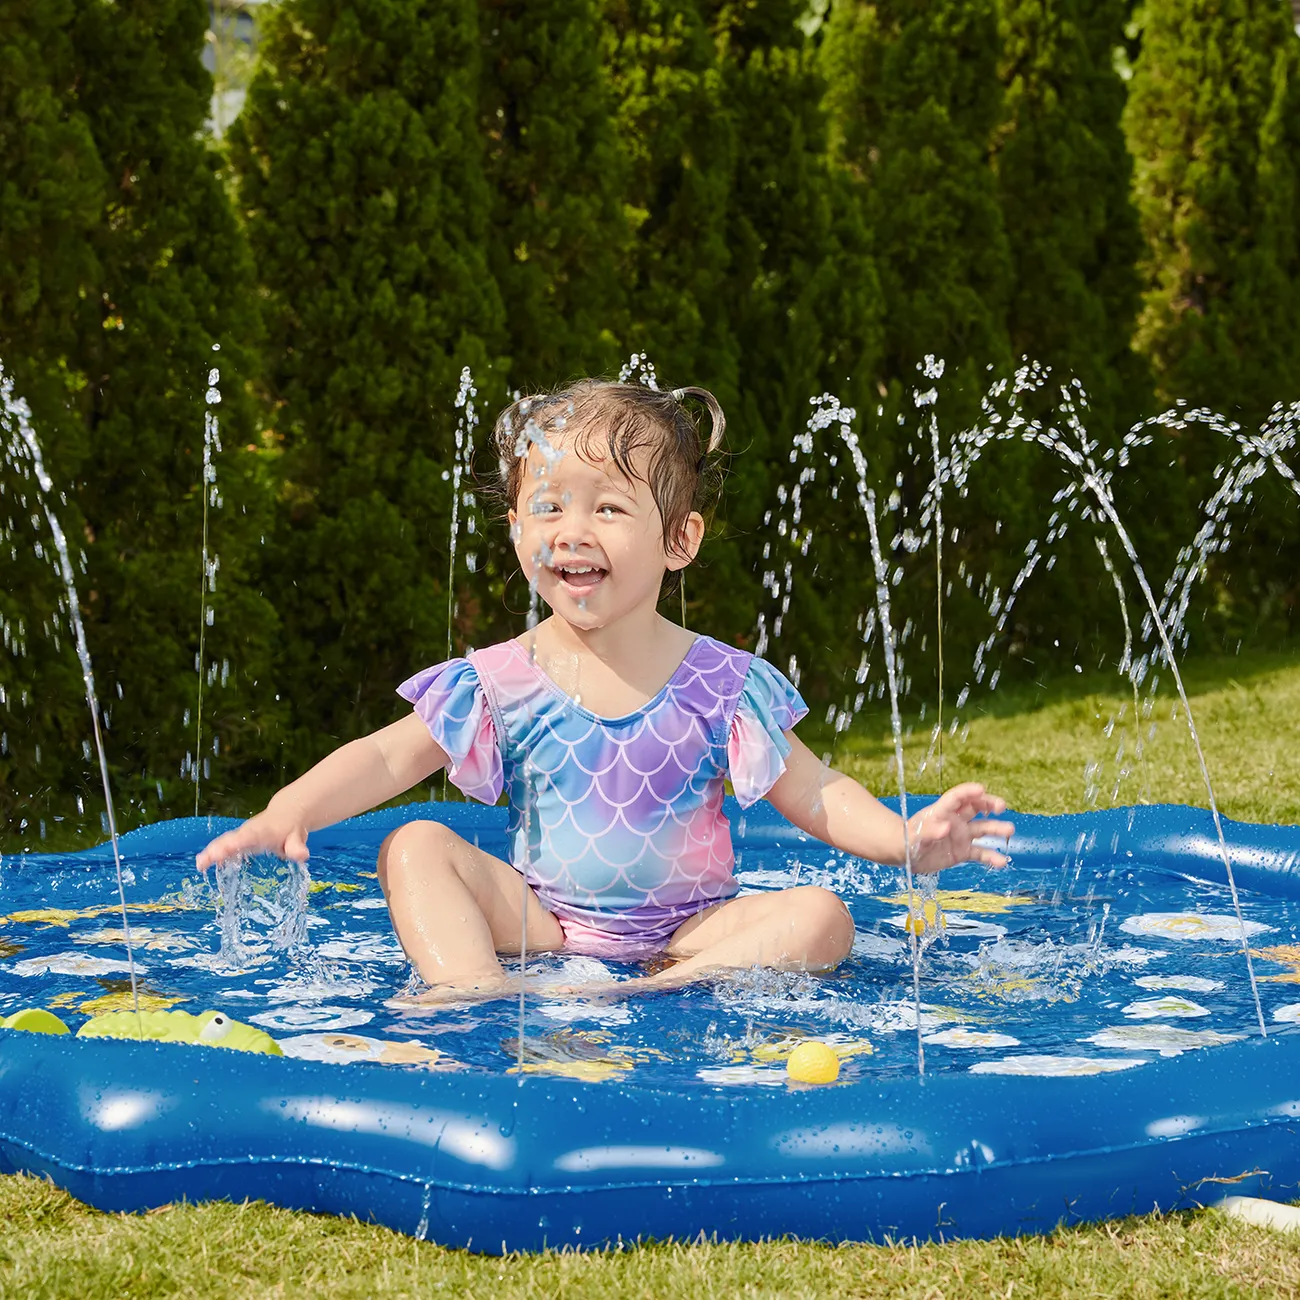 Kids Splash Pad Water Spray Play Mat Sprinkler Wading Pool Outdoor Inflatable Water Summer Toys with Alphabet Blue big image 1